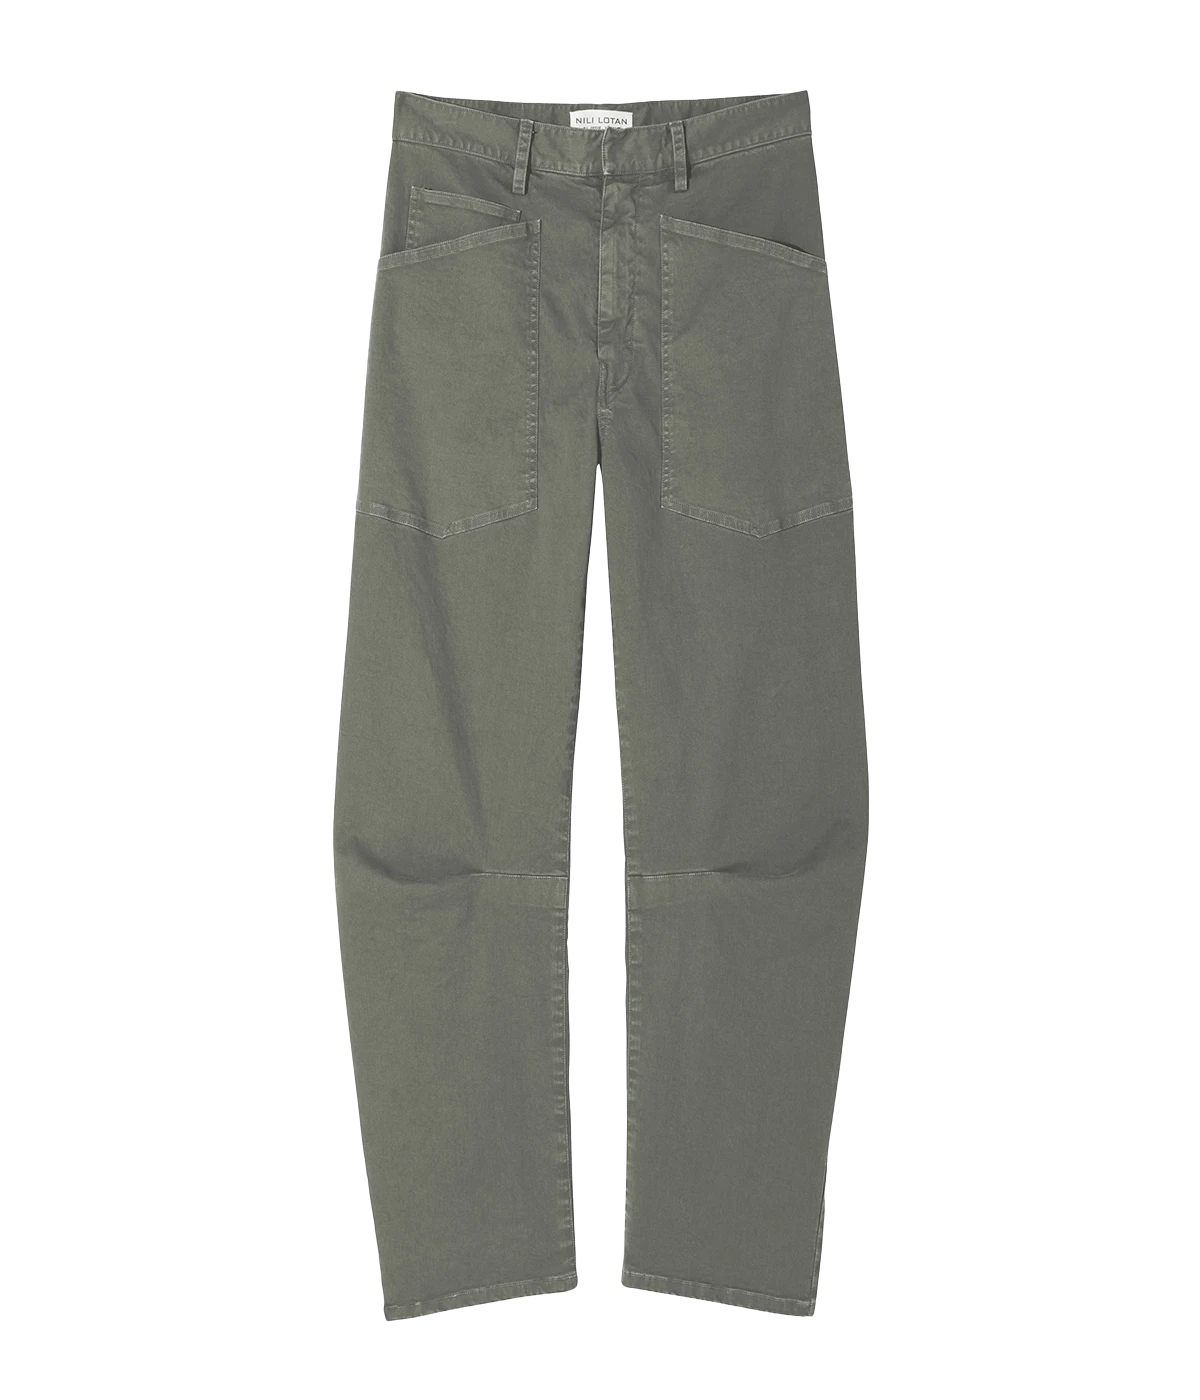 Shon Pant in Admiral Green